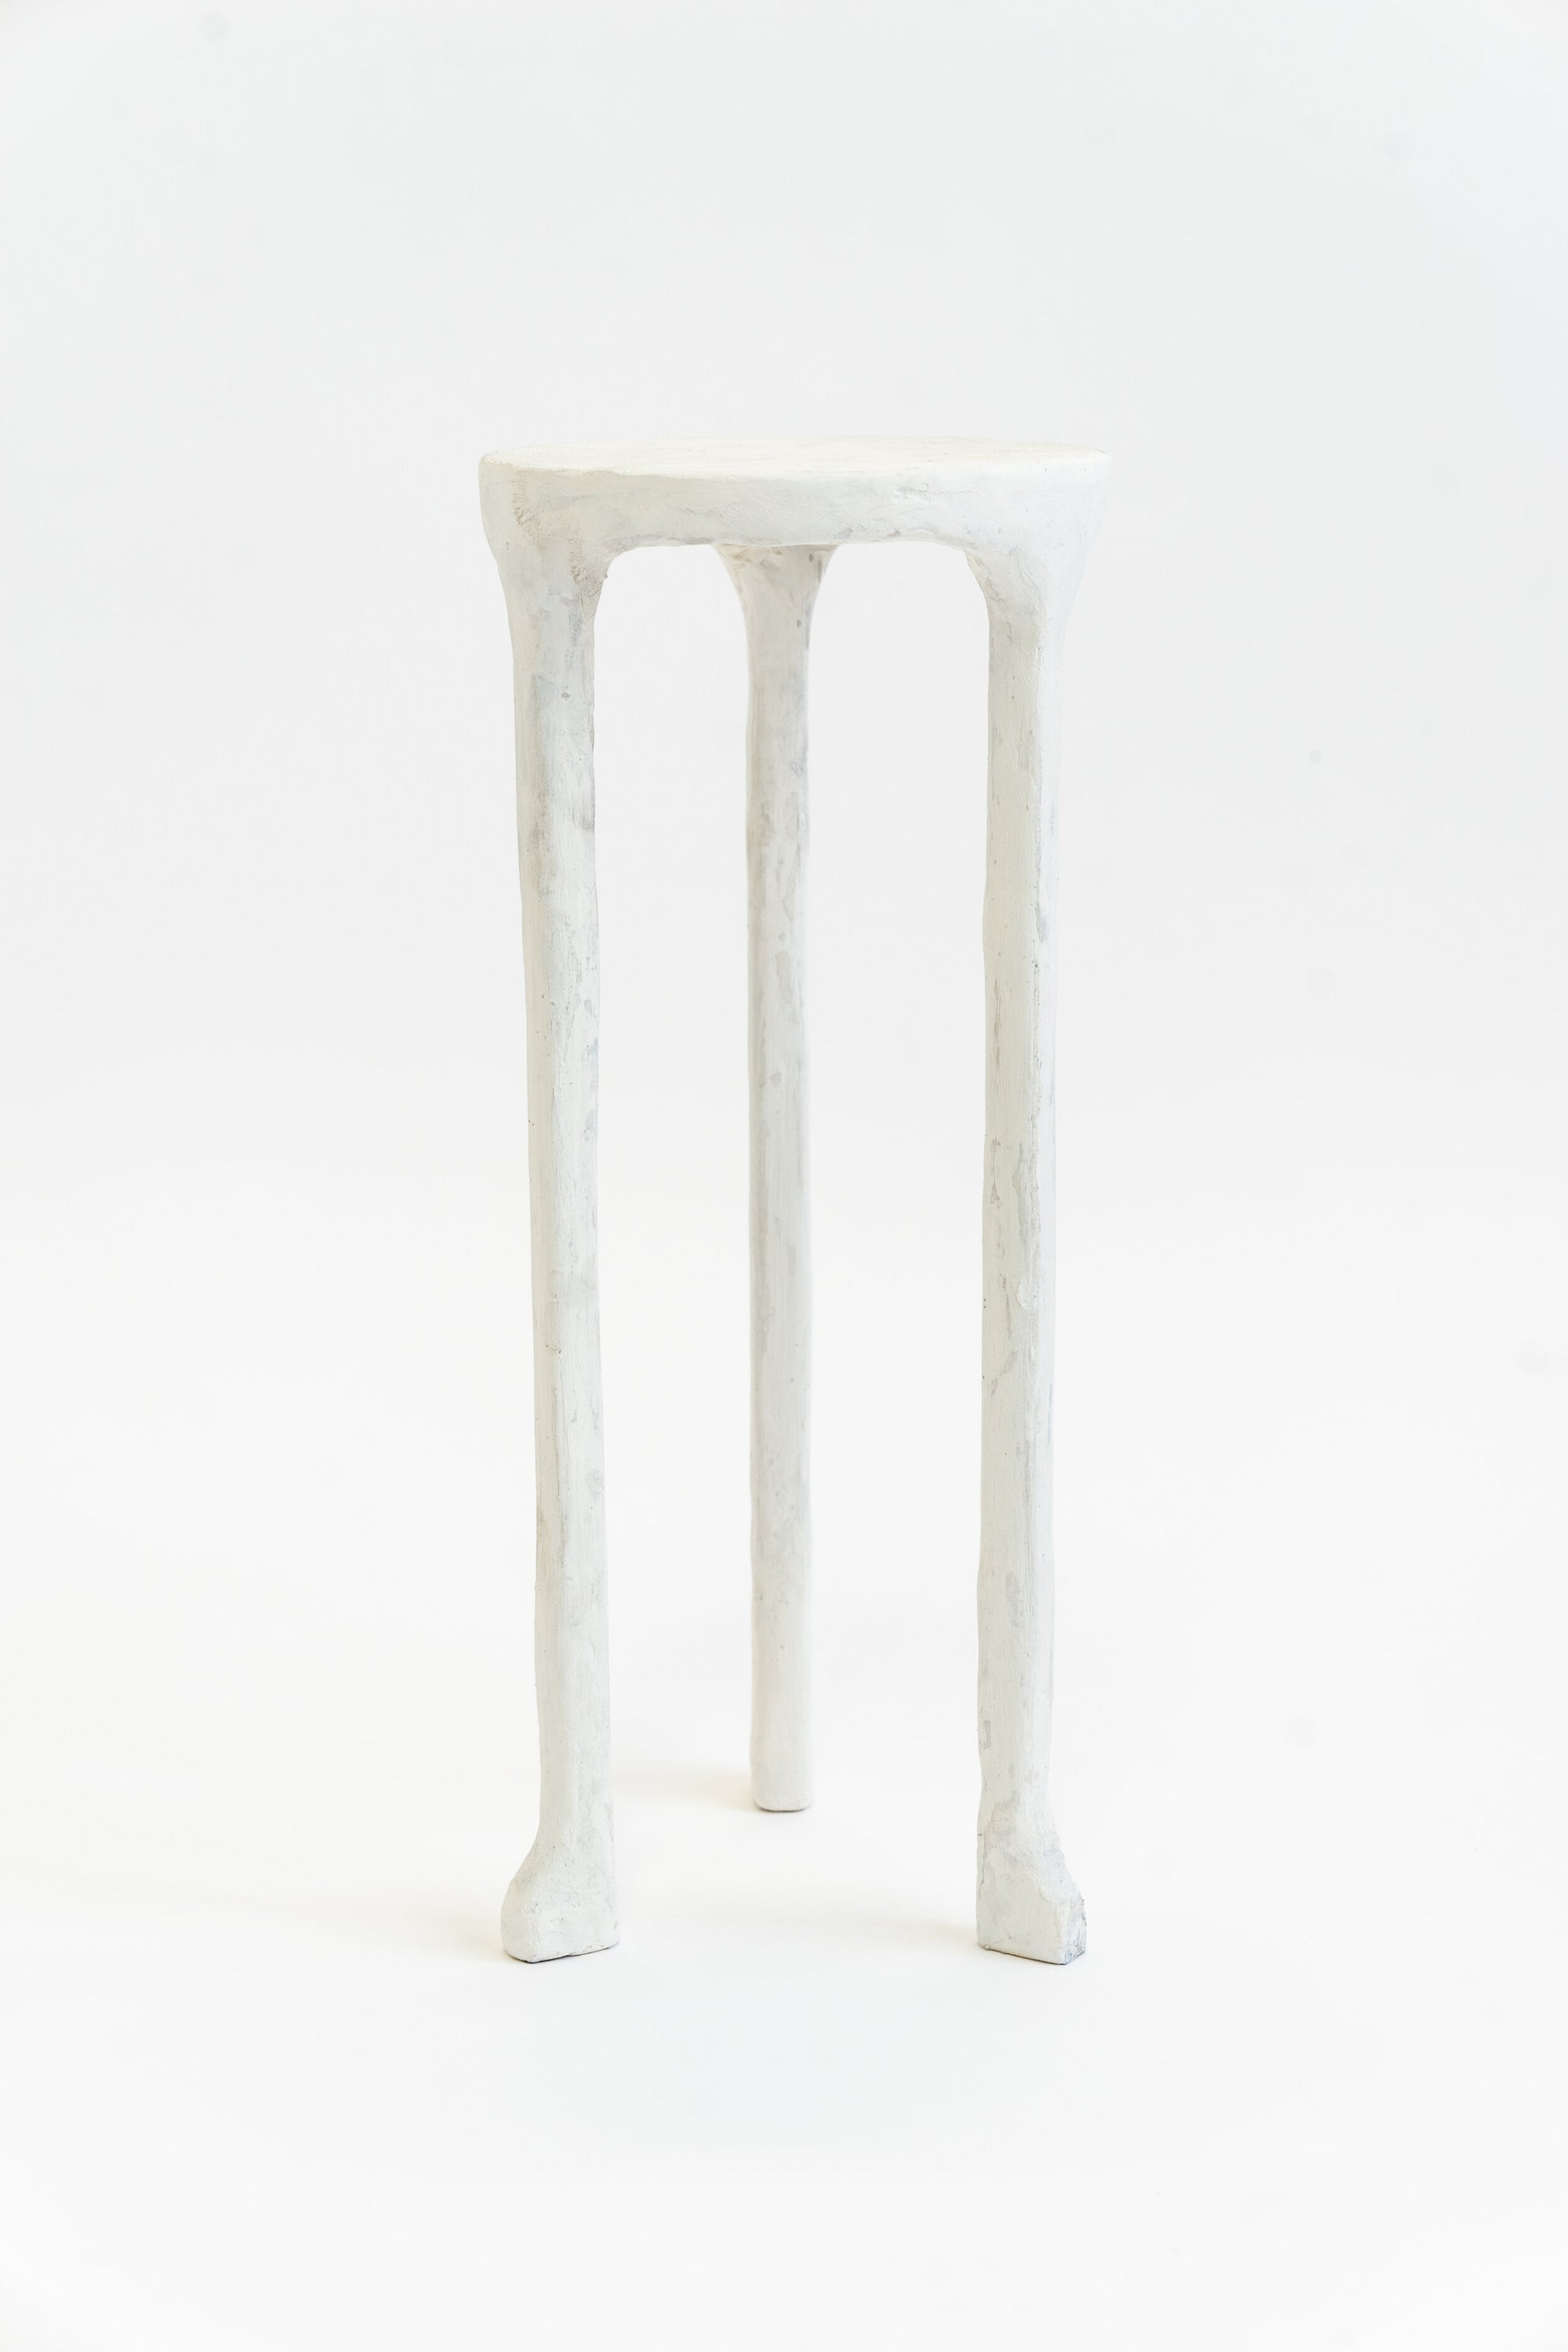 TABLE NO. 3 - PLASTER